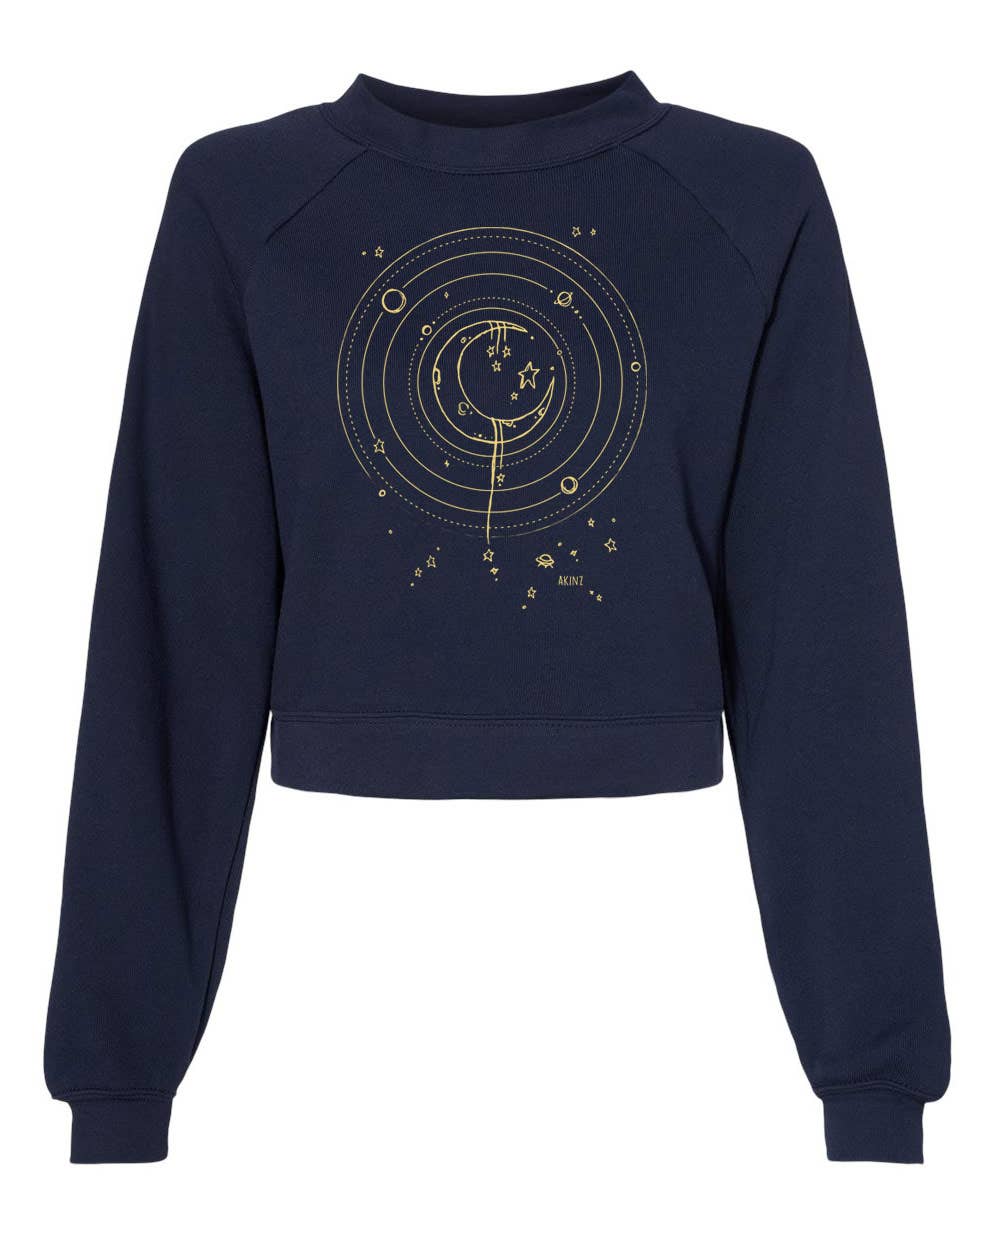 Fly Me to the Moon Cropped Sweatshirt-Navy